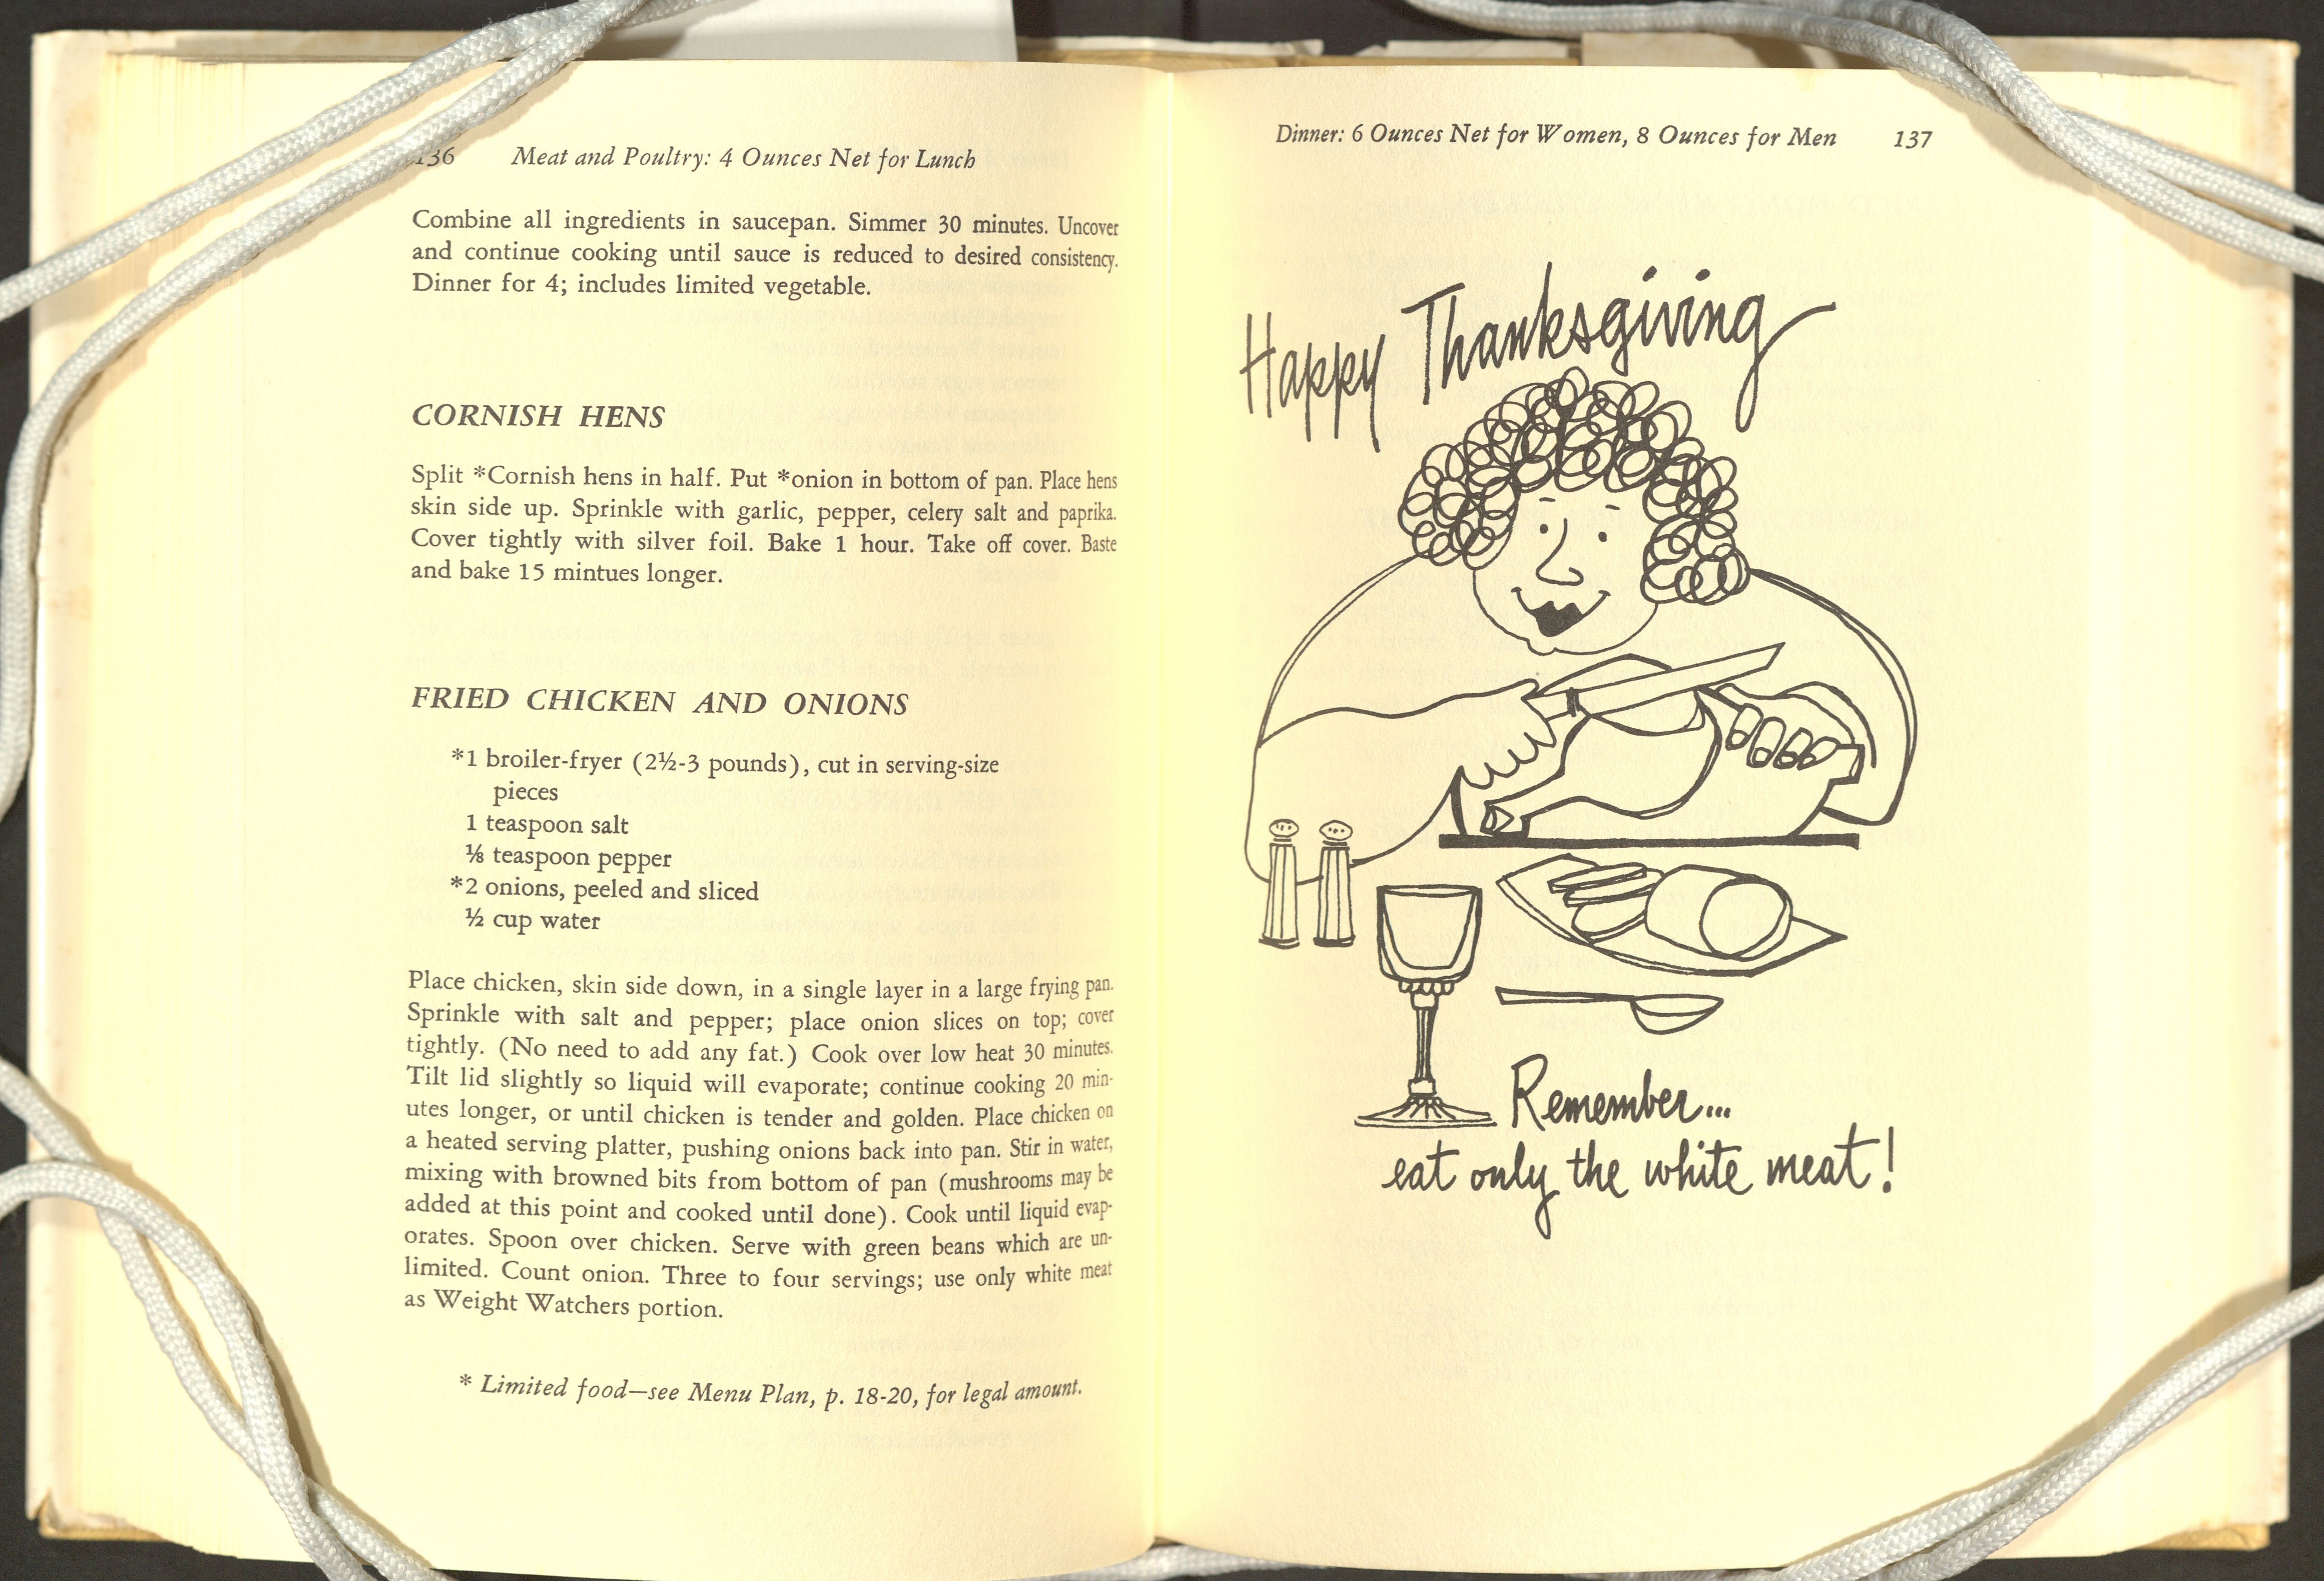 Pagespread from Weight Watcher's Cookbook, with a line drawing depicting a large woman at table below "Happy Thanksgiving"